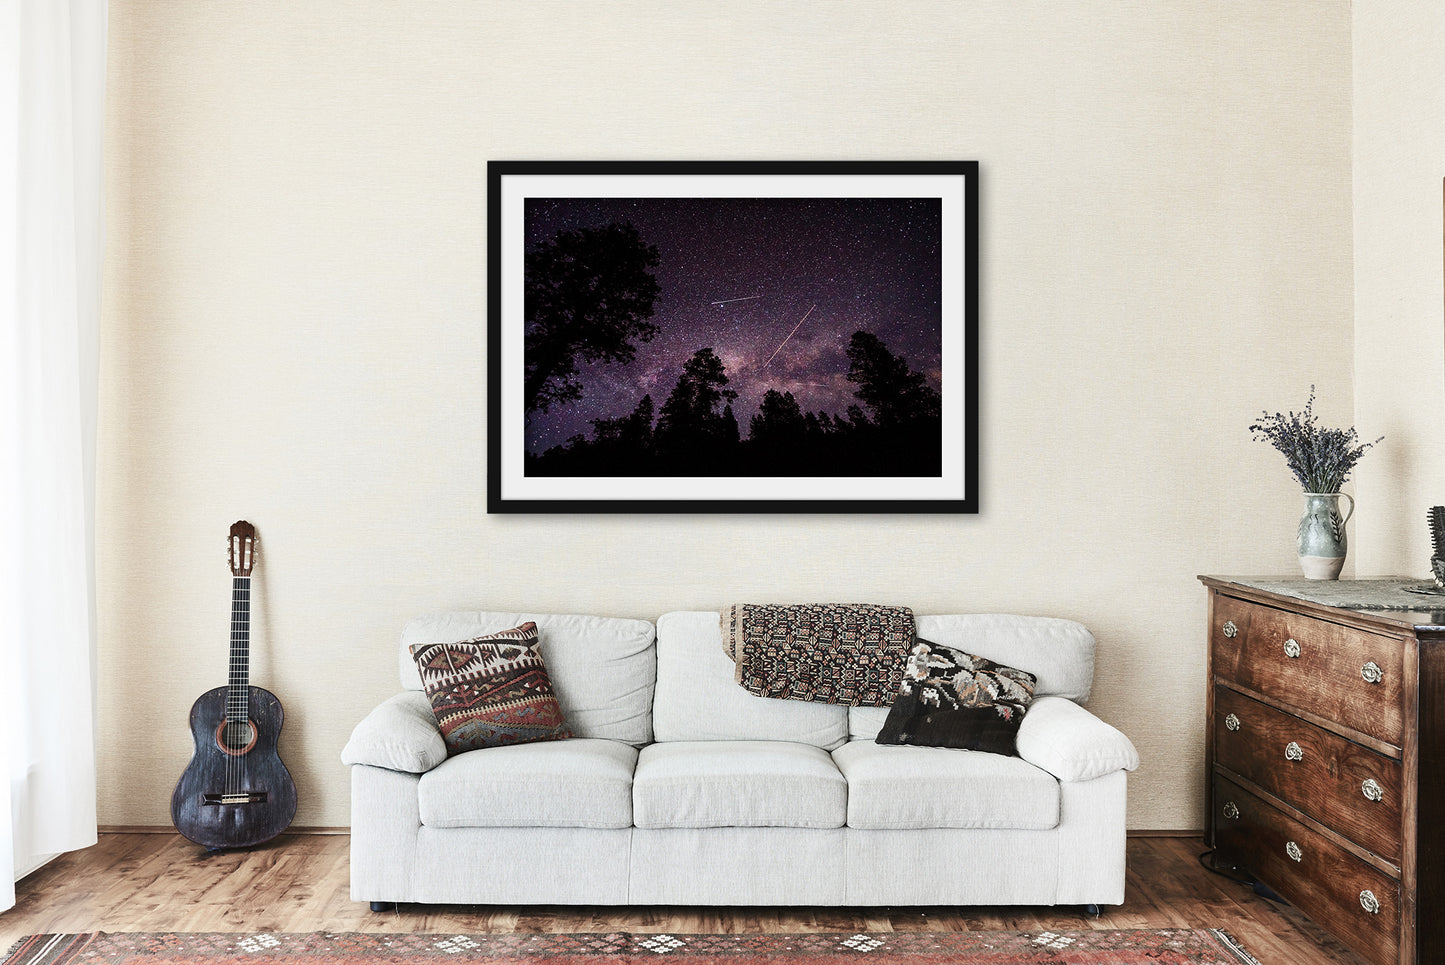 Framed and Matted Print - Picture of Shooting Stars Planes and Satellites in Night Sky with Milky Way in Colorado Wall Art Celestial Decor